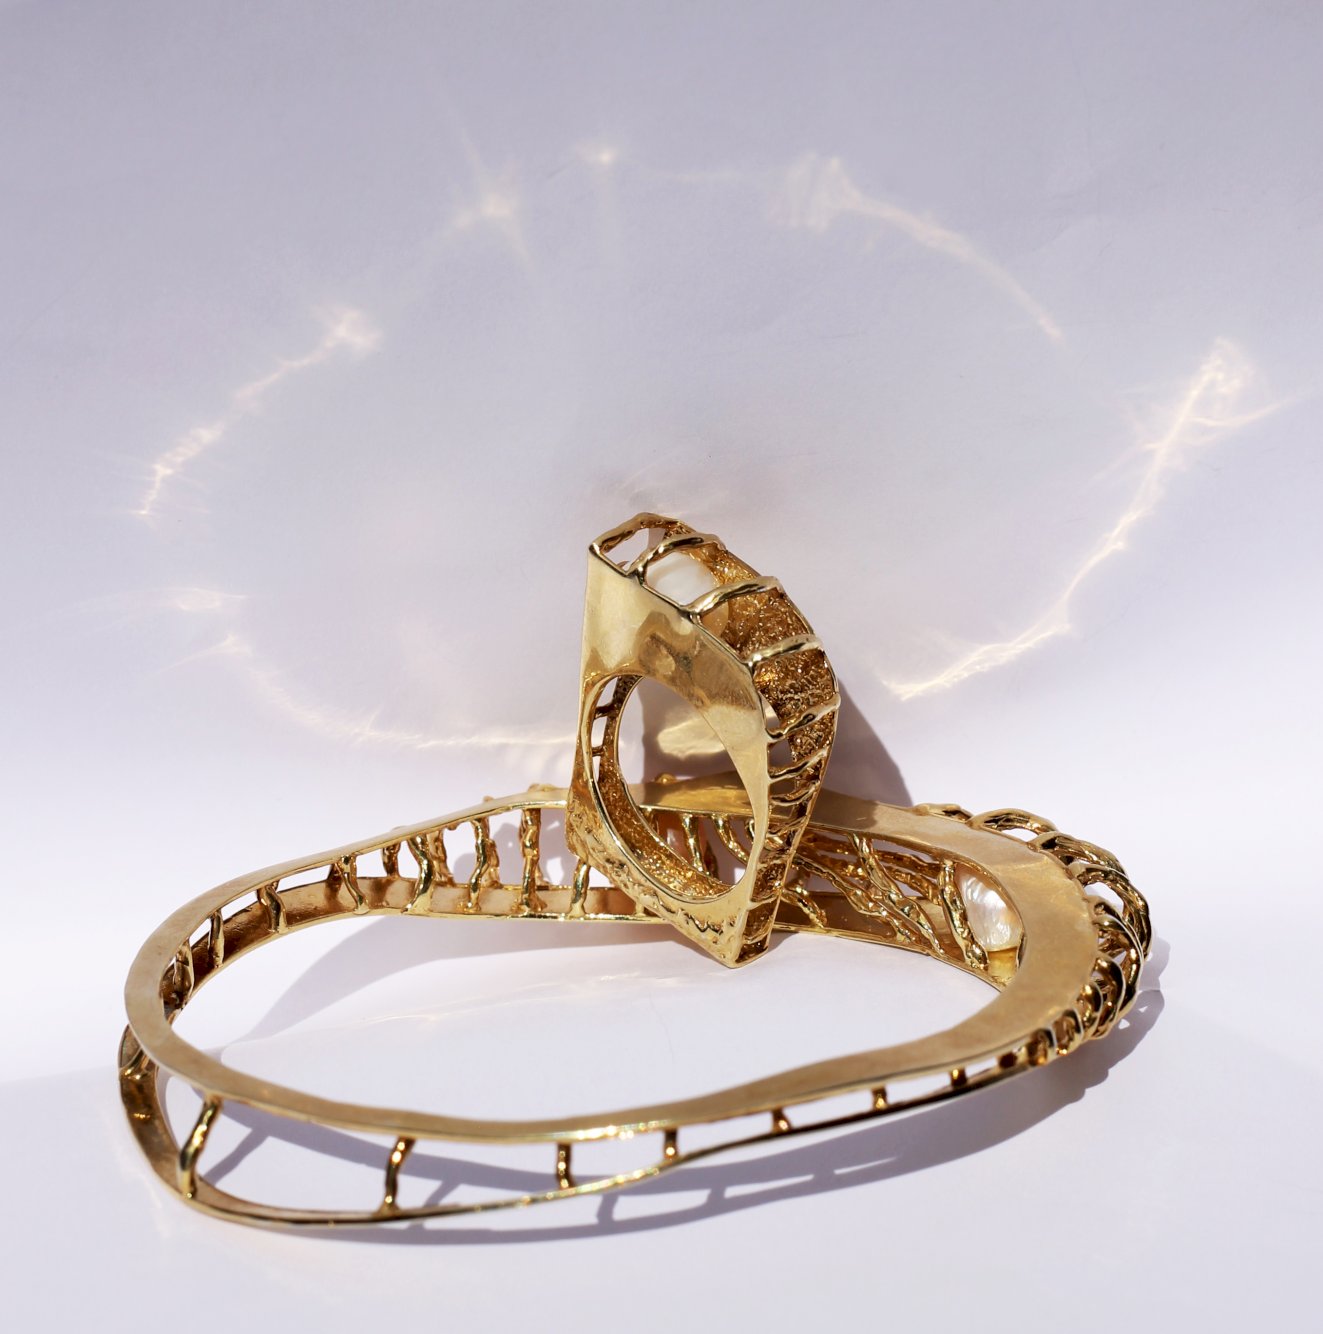 Cage ring and Cage armlet